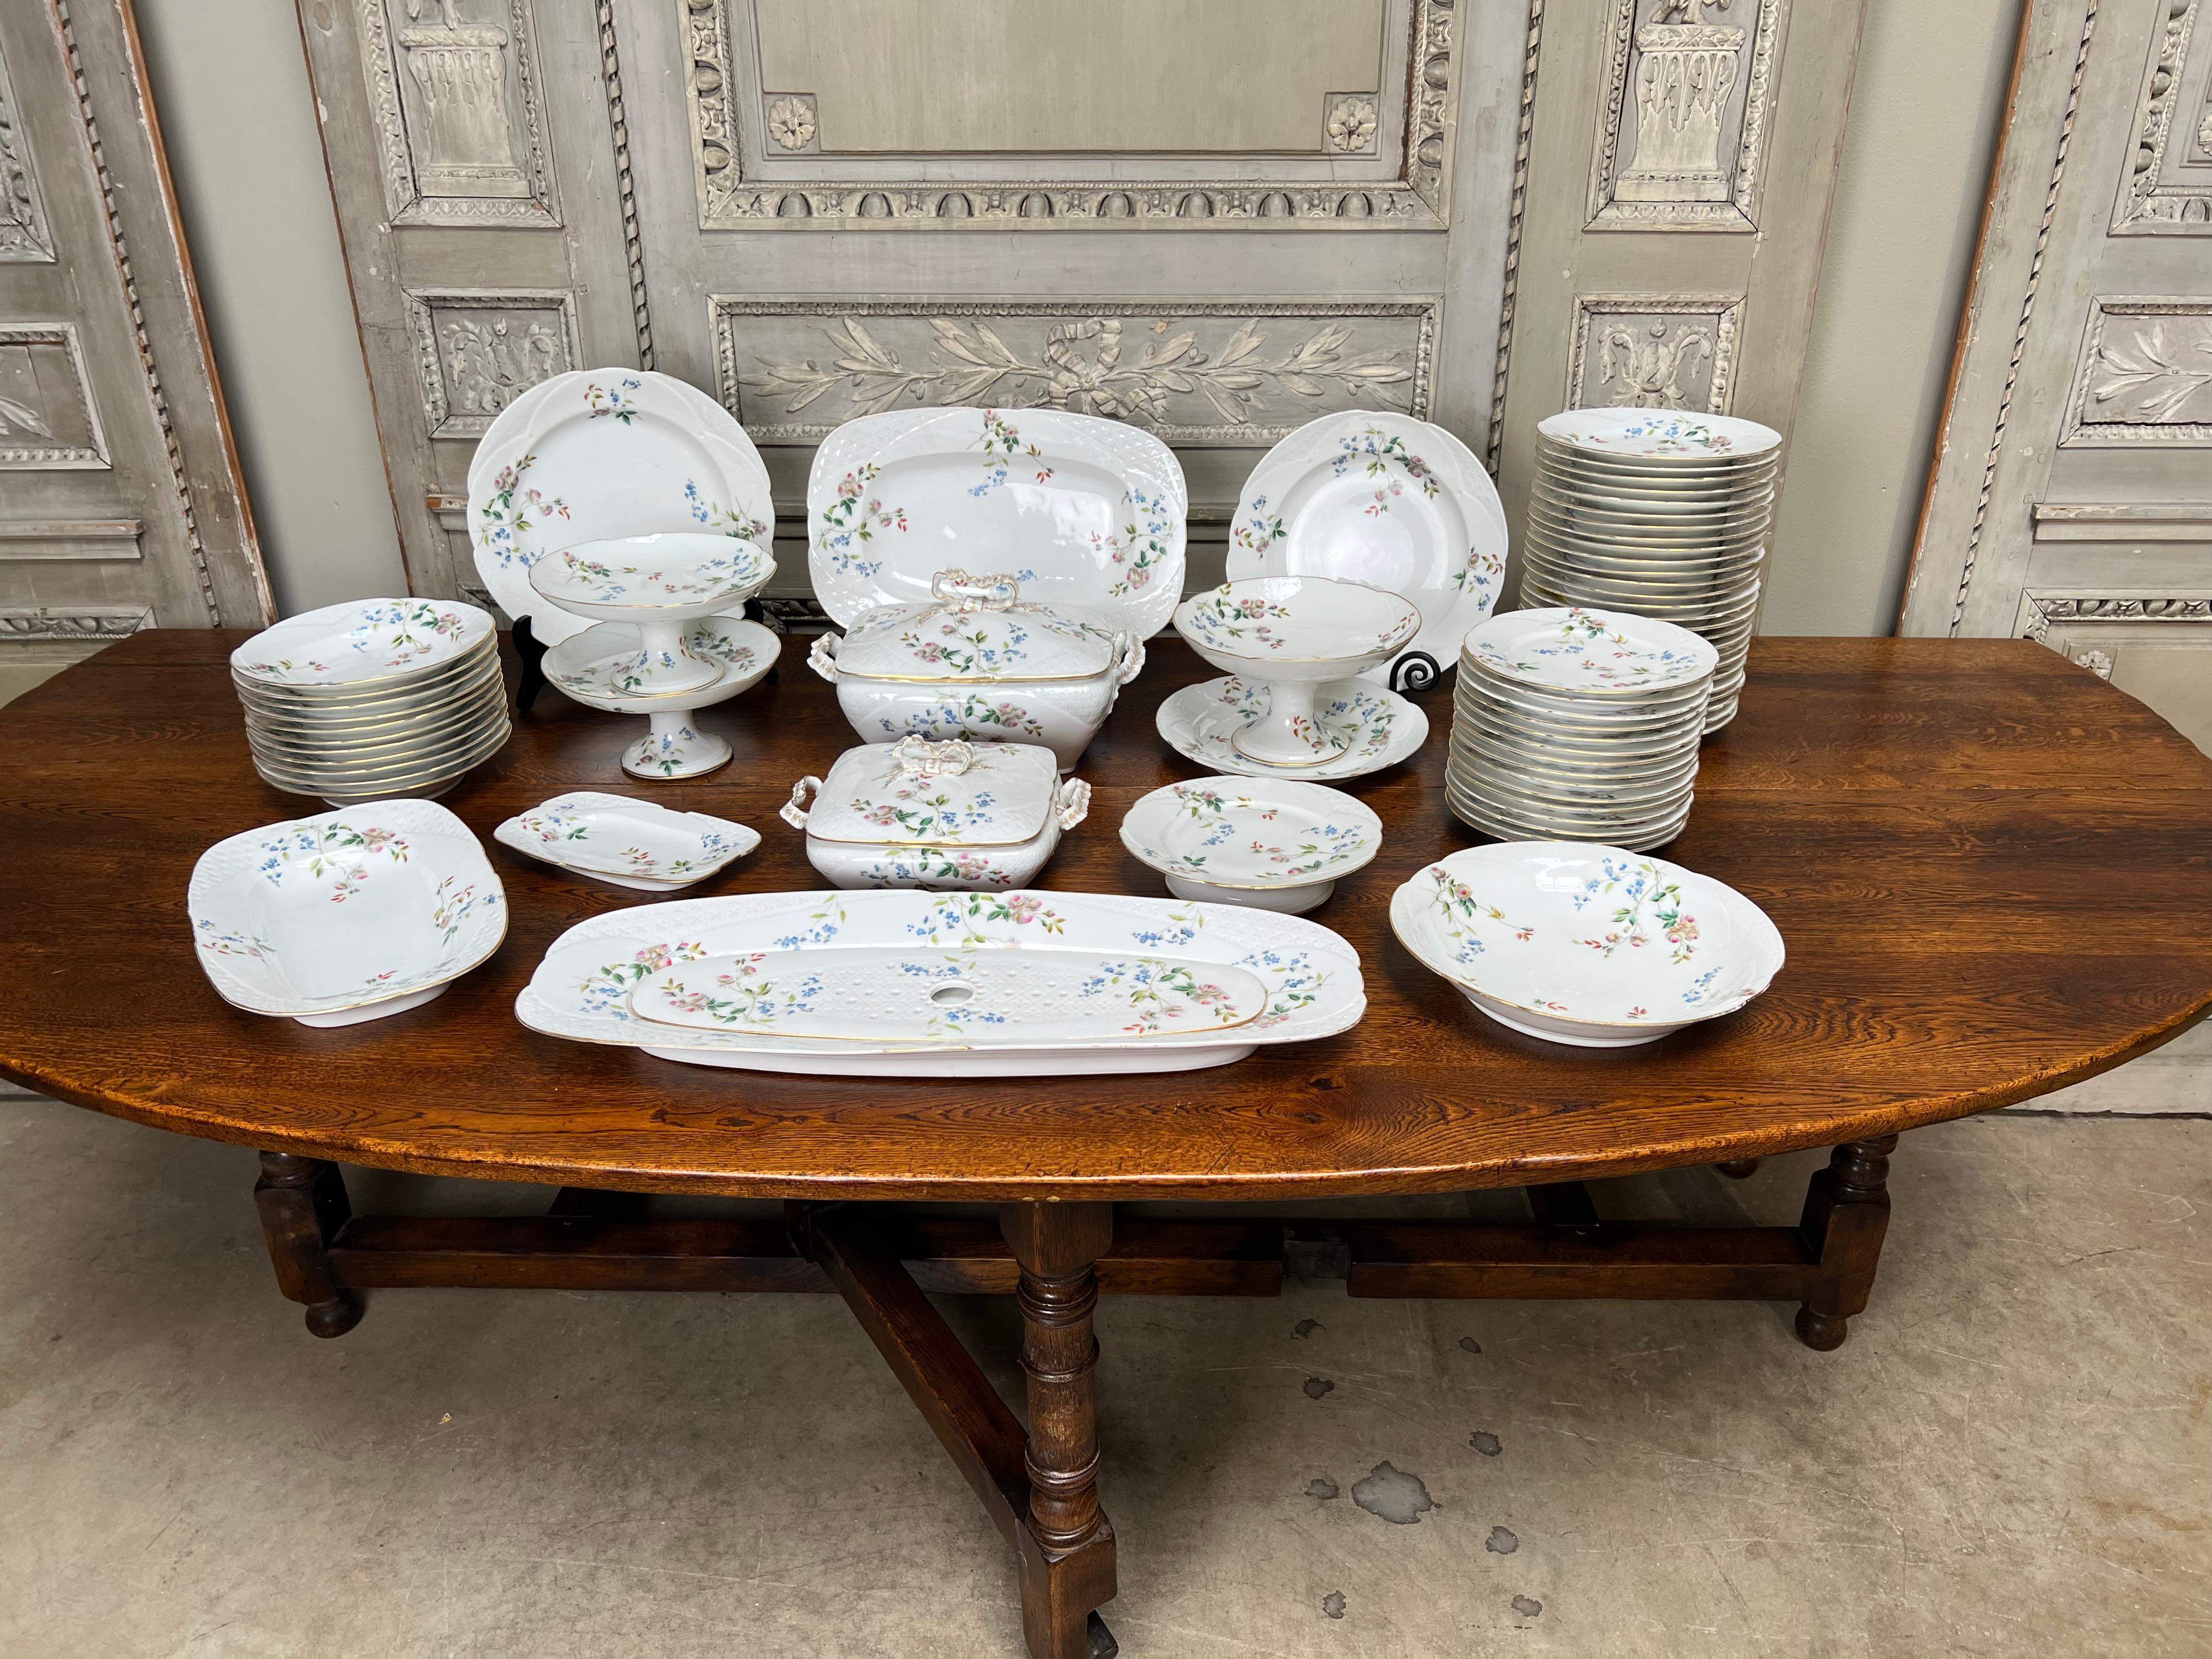 A large set of French porcelain tableware in the Louis XV style with a white ground with pink and blue floral and gilt edging.  This set consist of 
26 9